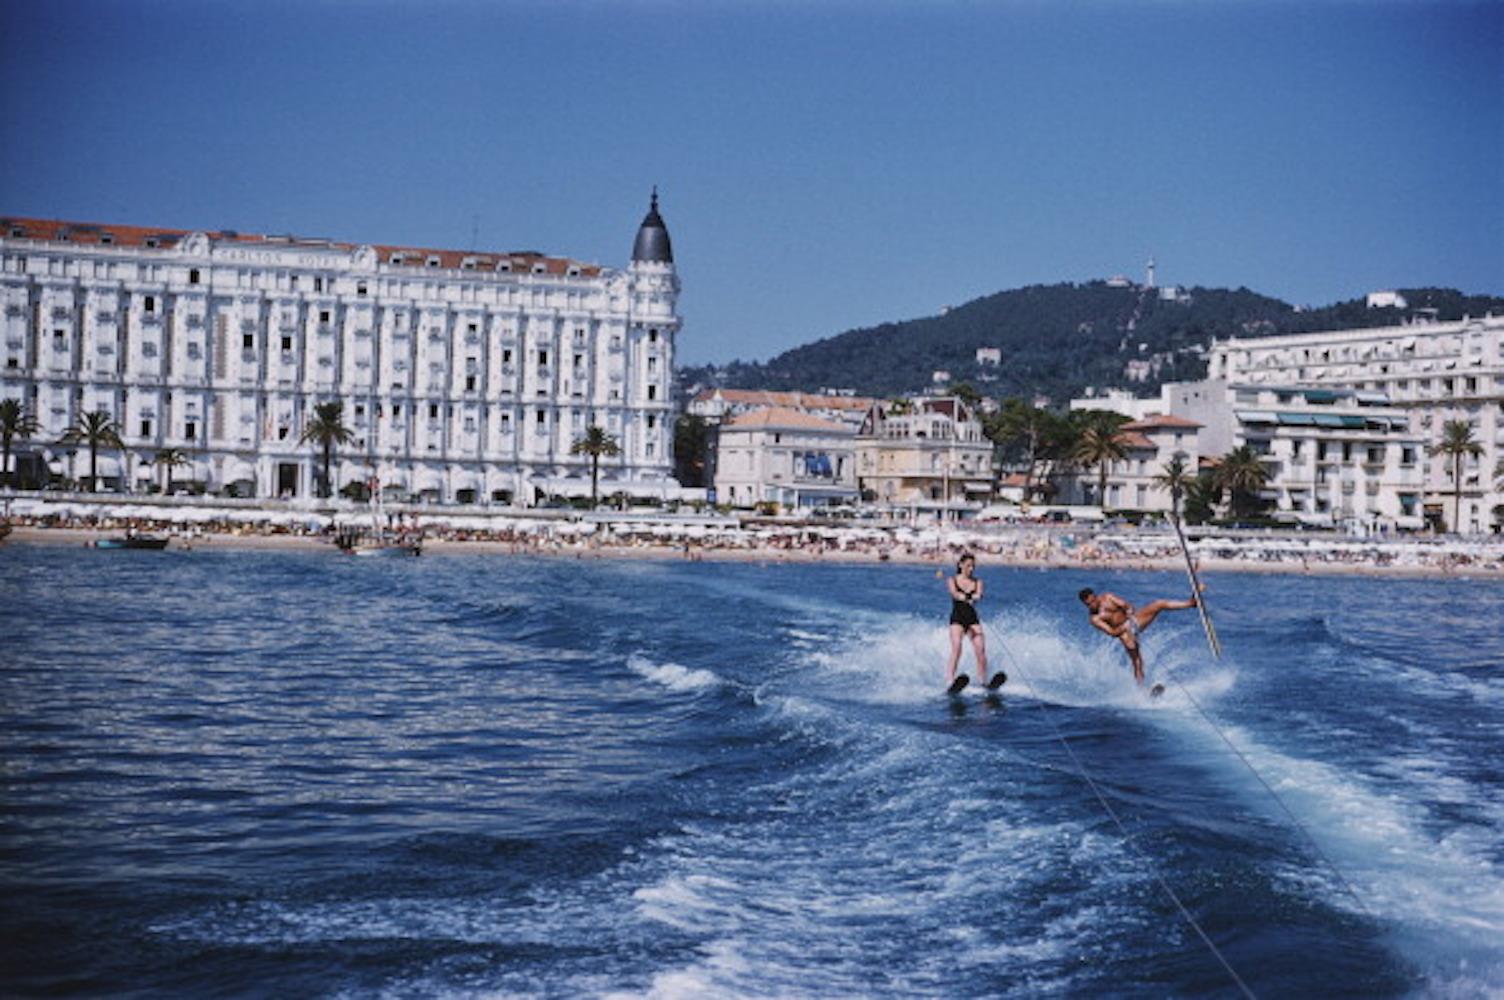 Cannes Watersports, 1958 - Slim Aarons, 20th Century, French Riviera, Blue skies